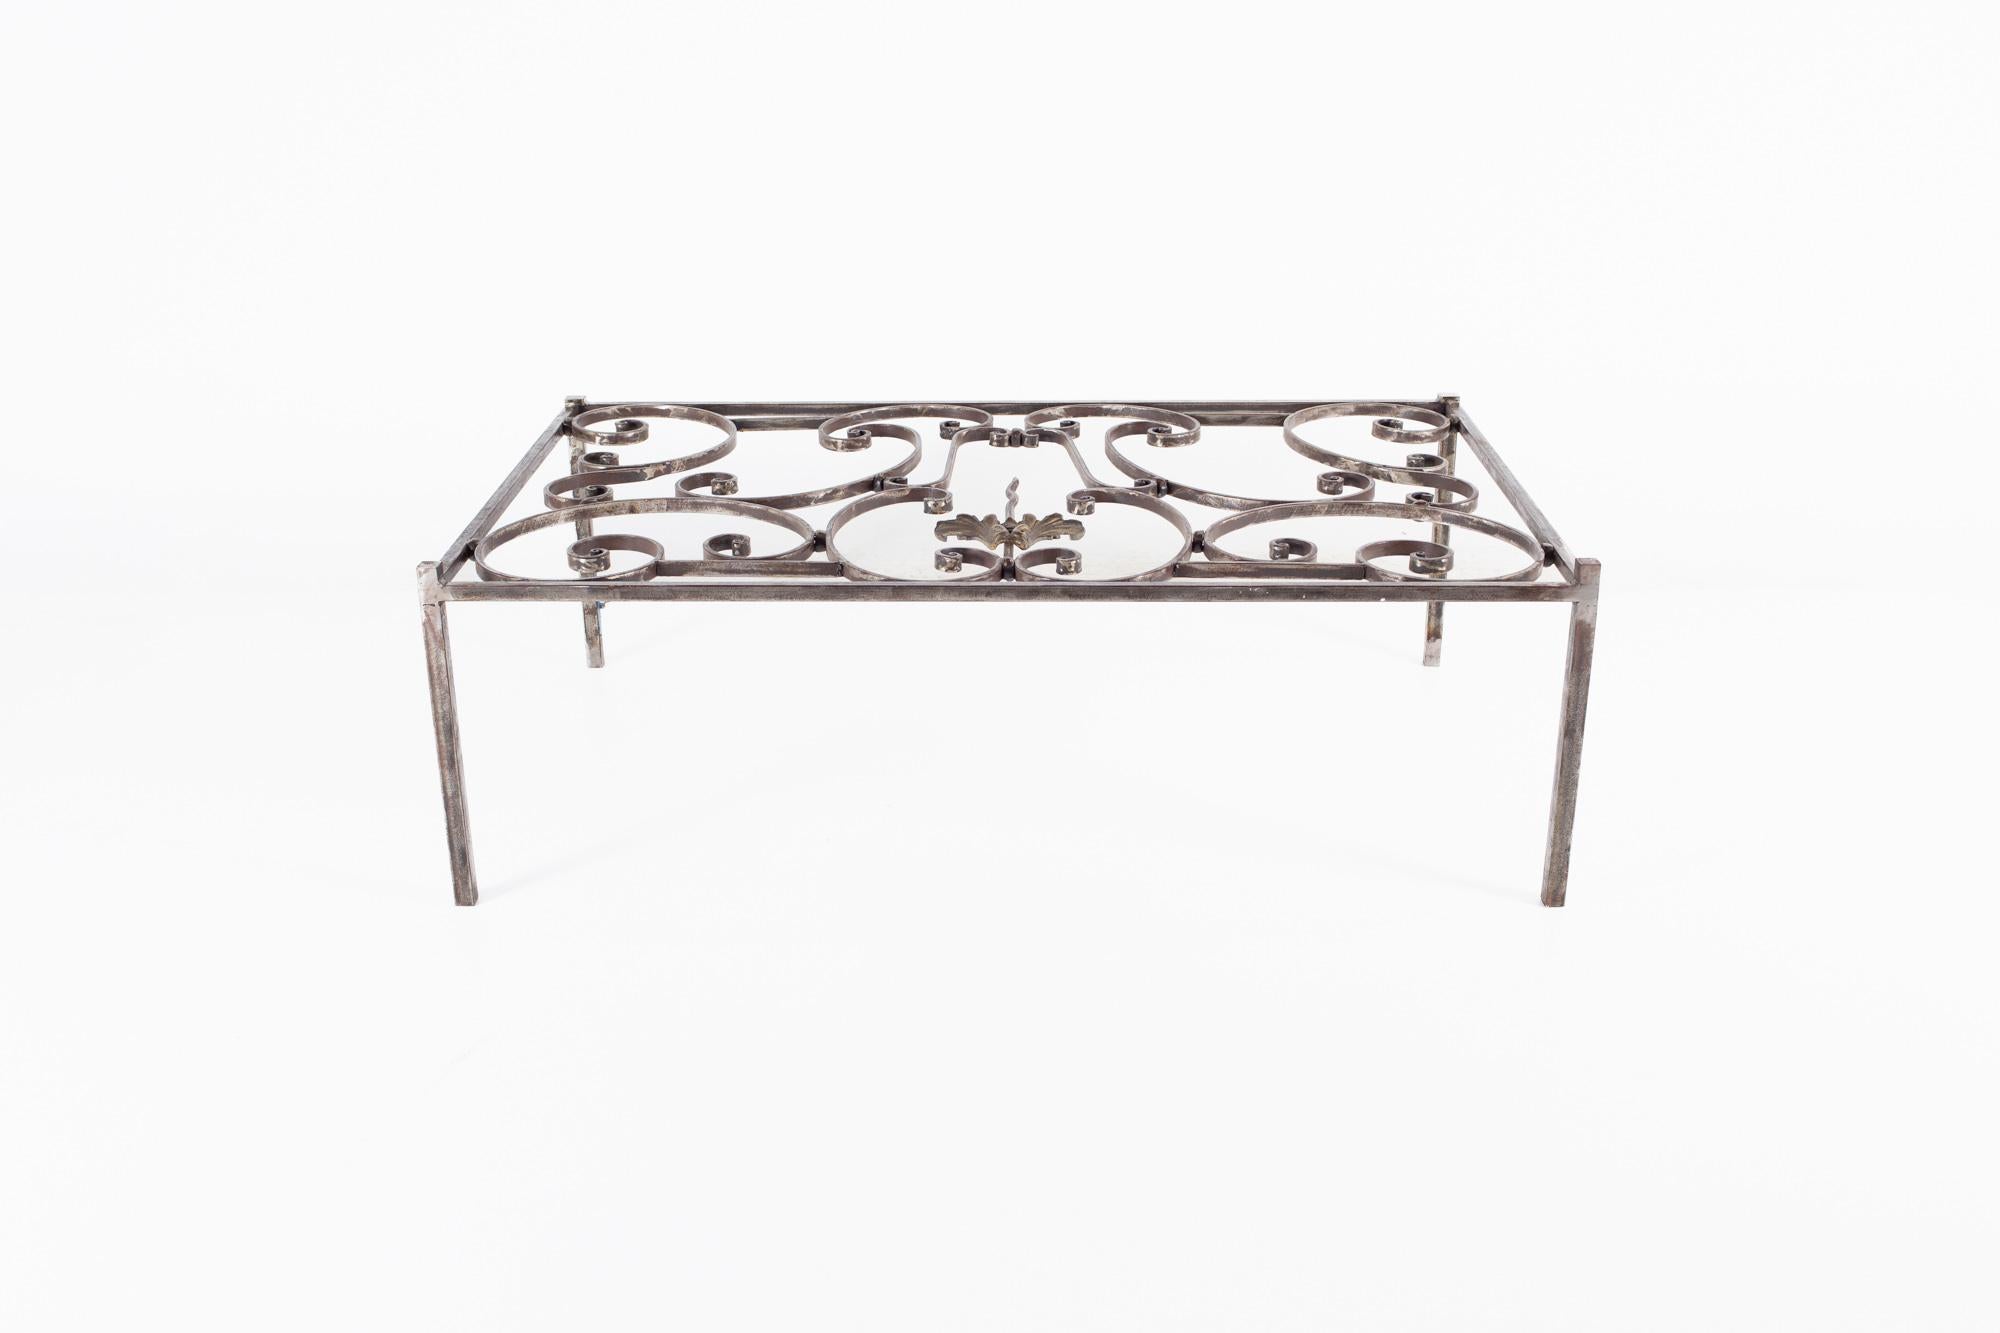 Maison Jansen Style Antique French Iron and Glass Top Coffee Table, Pair In Good Condition For Sale In Countryside, IL